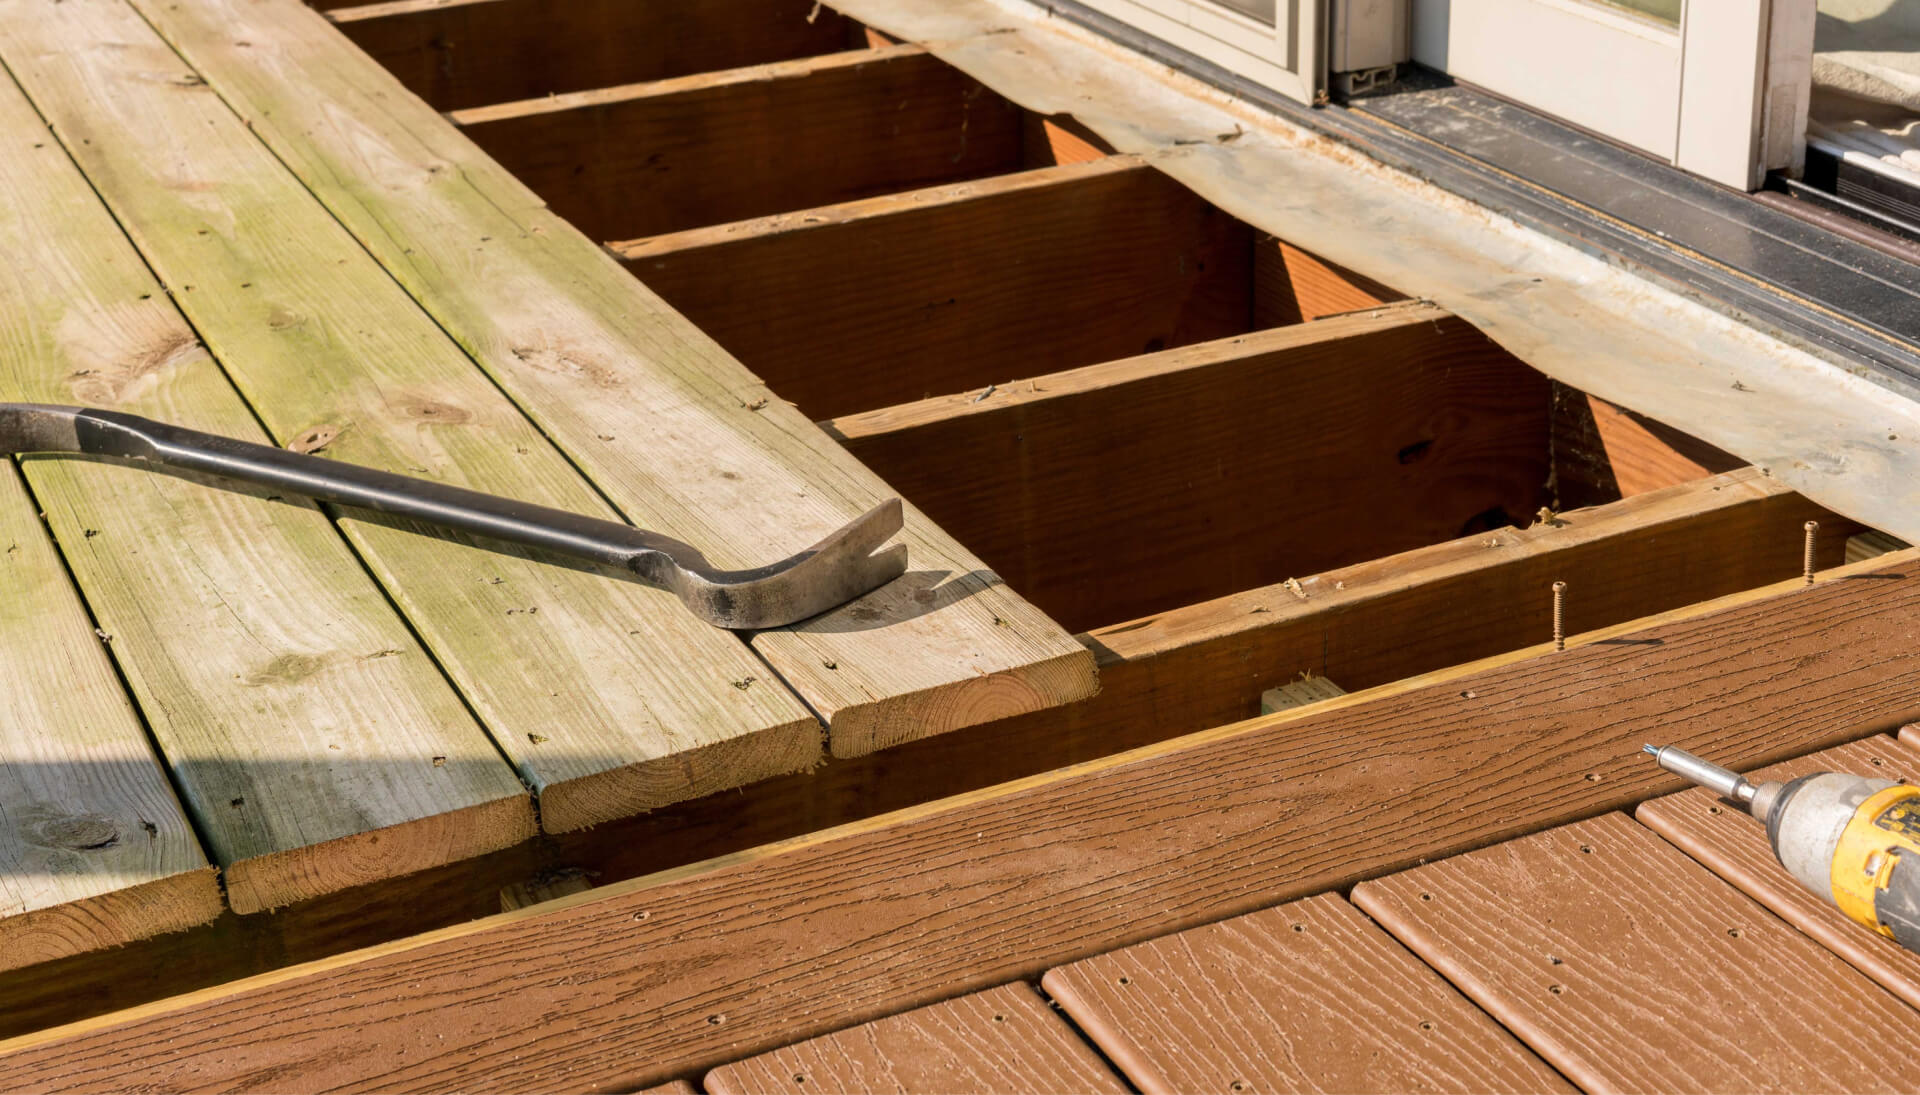 A professional deck repair service in Brooklyn, providing thorough inspections and maintenance to ensure the safety and durability of the structure